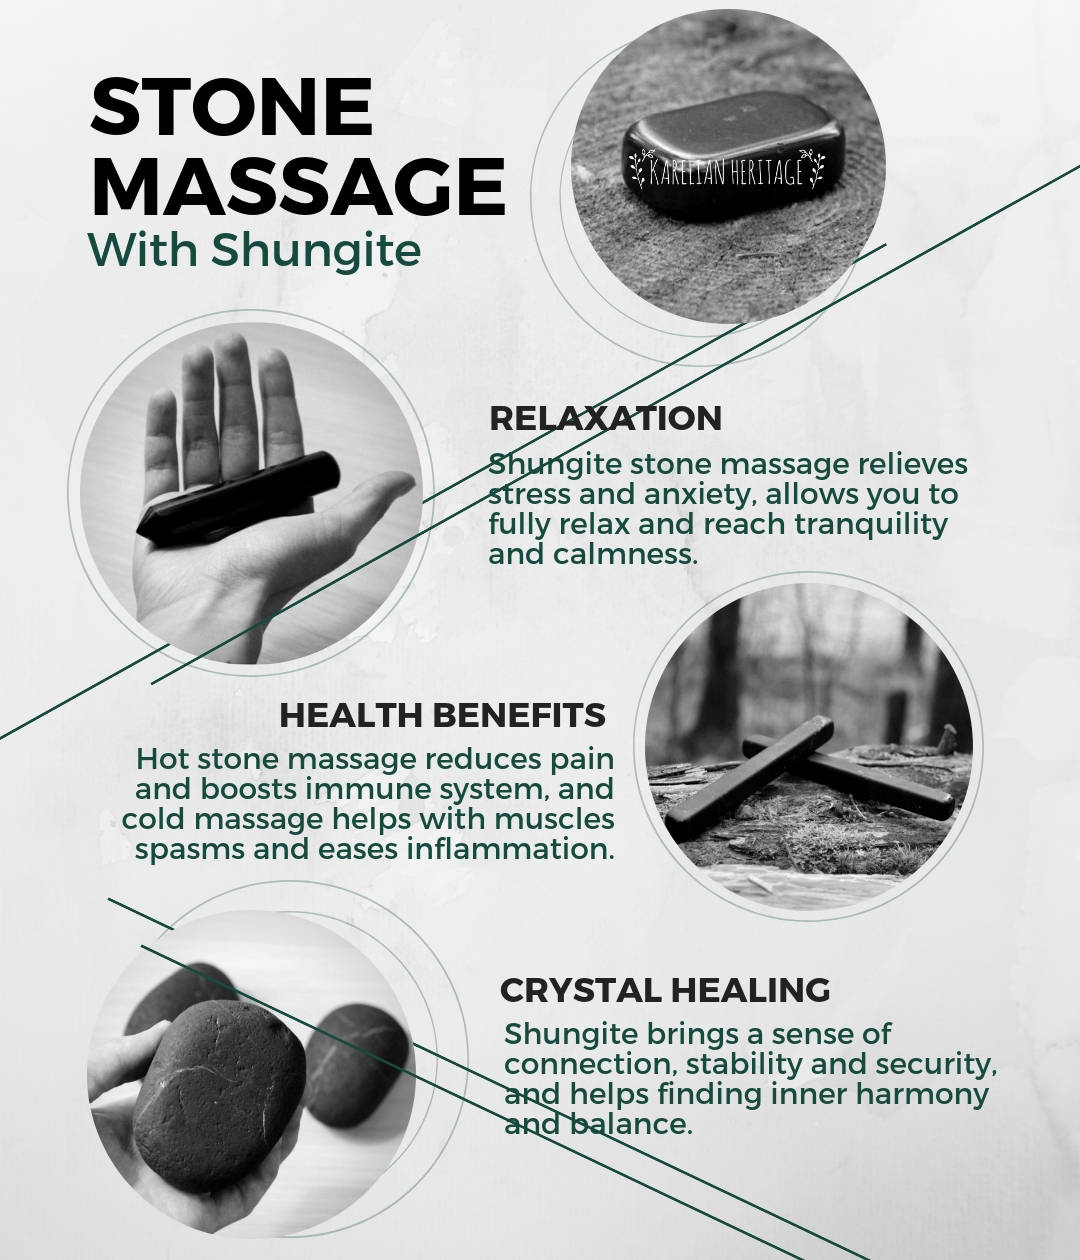 SHUNGITE SMOOTH NATURAL STONES stone-therapy set for massage.